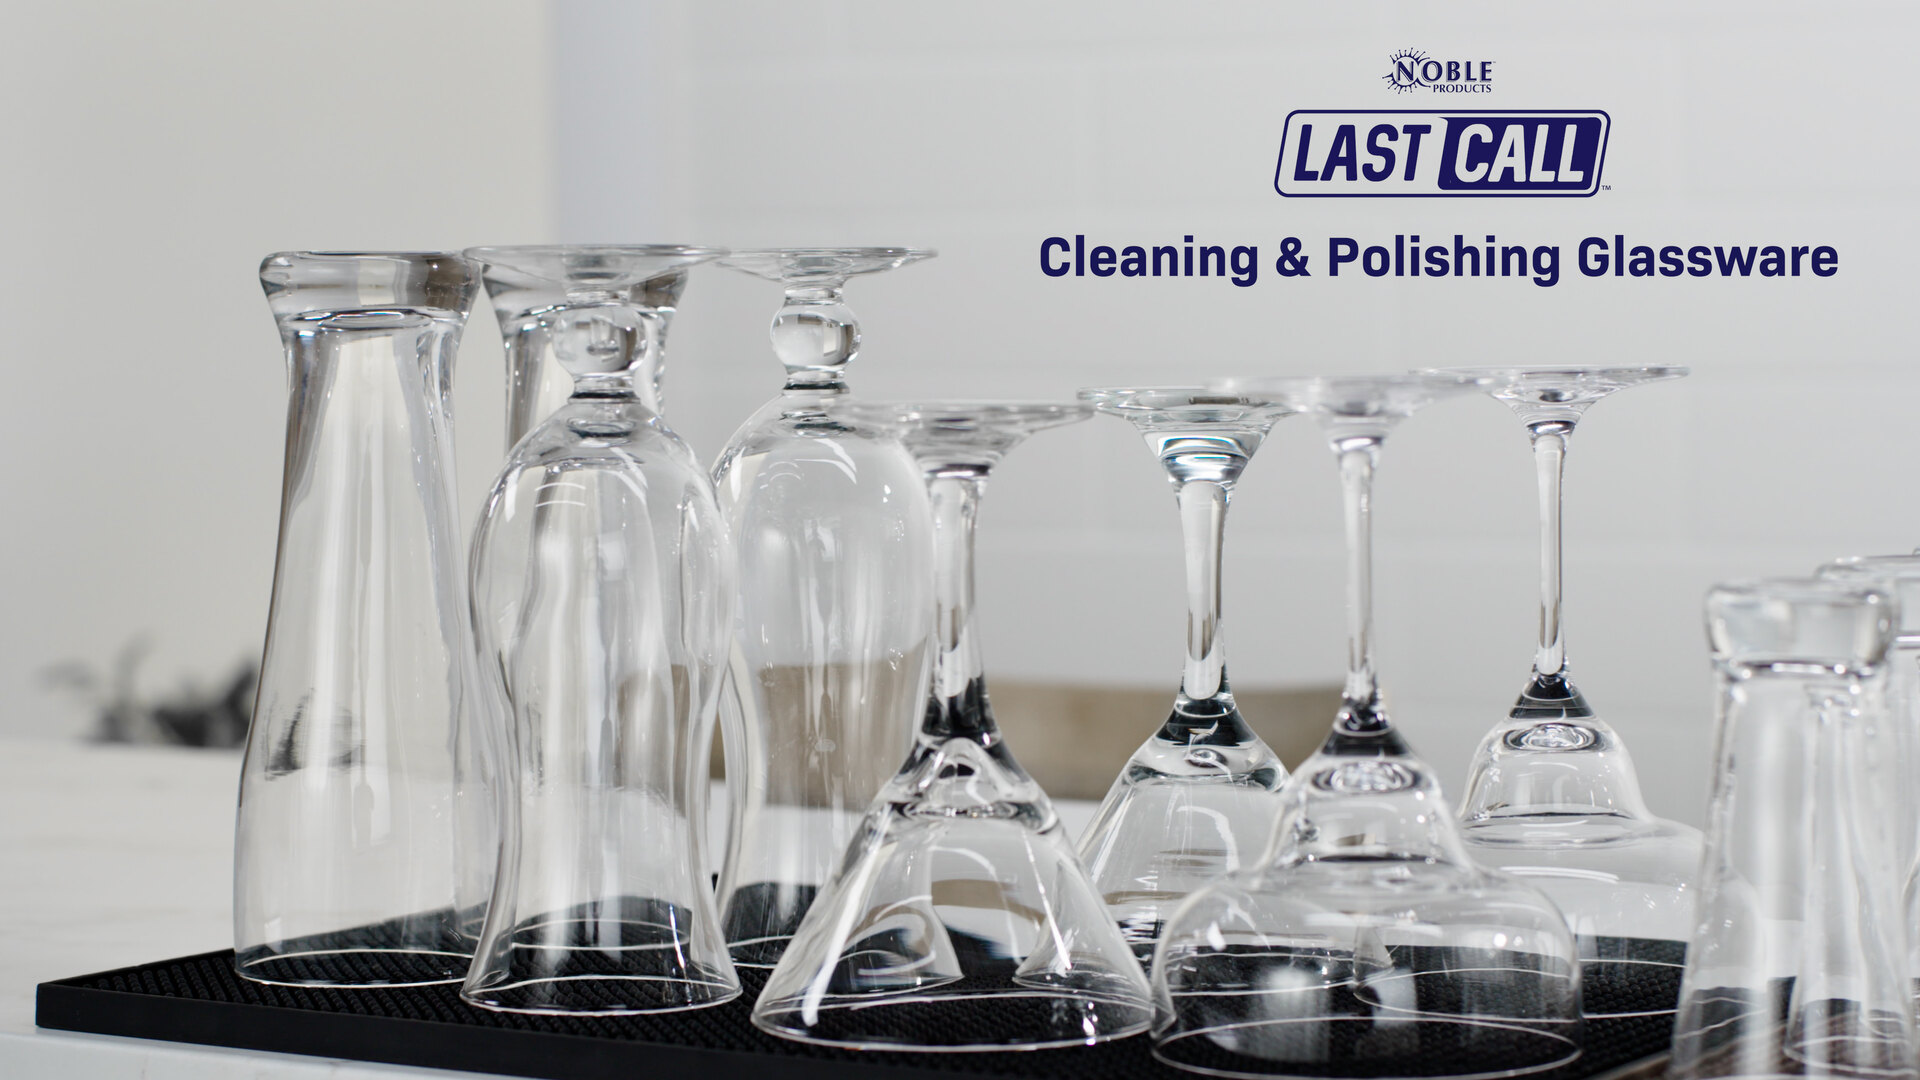 How to Clean & Polish Glassware Like a Pro